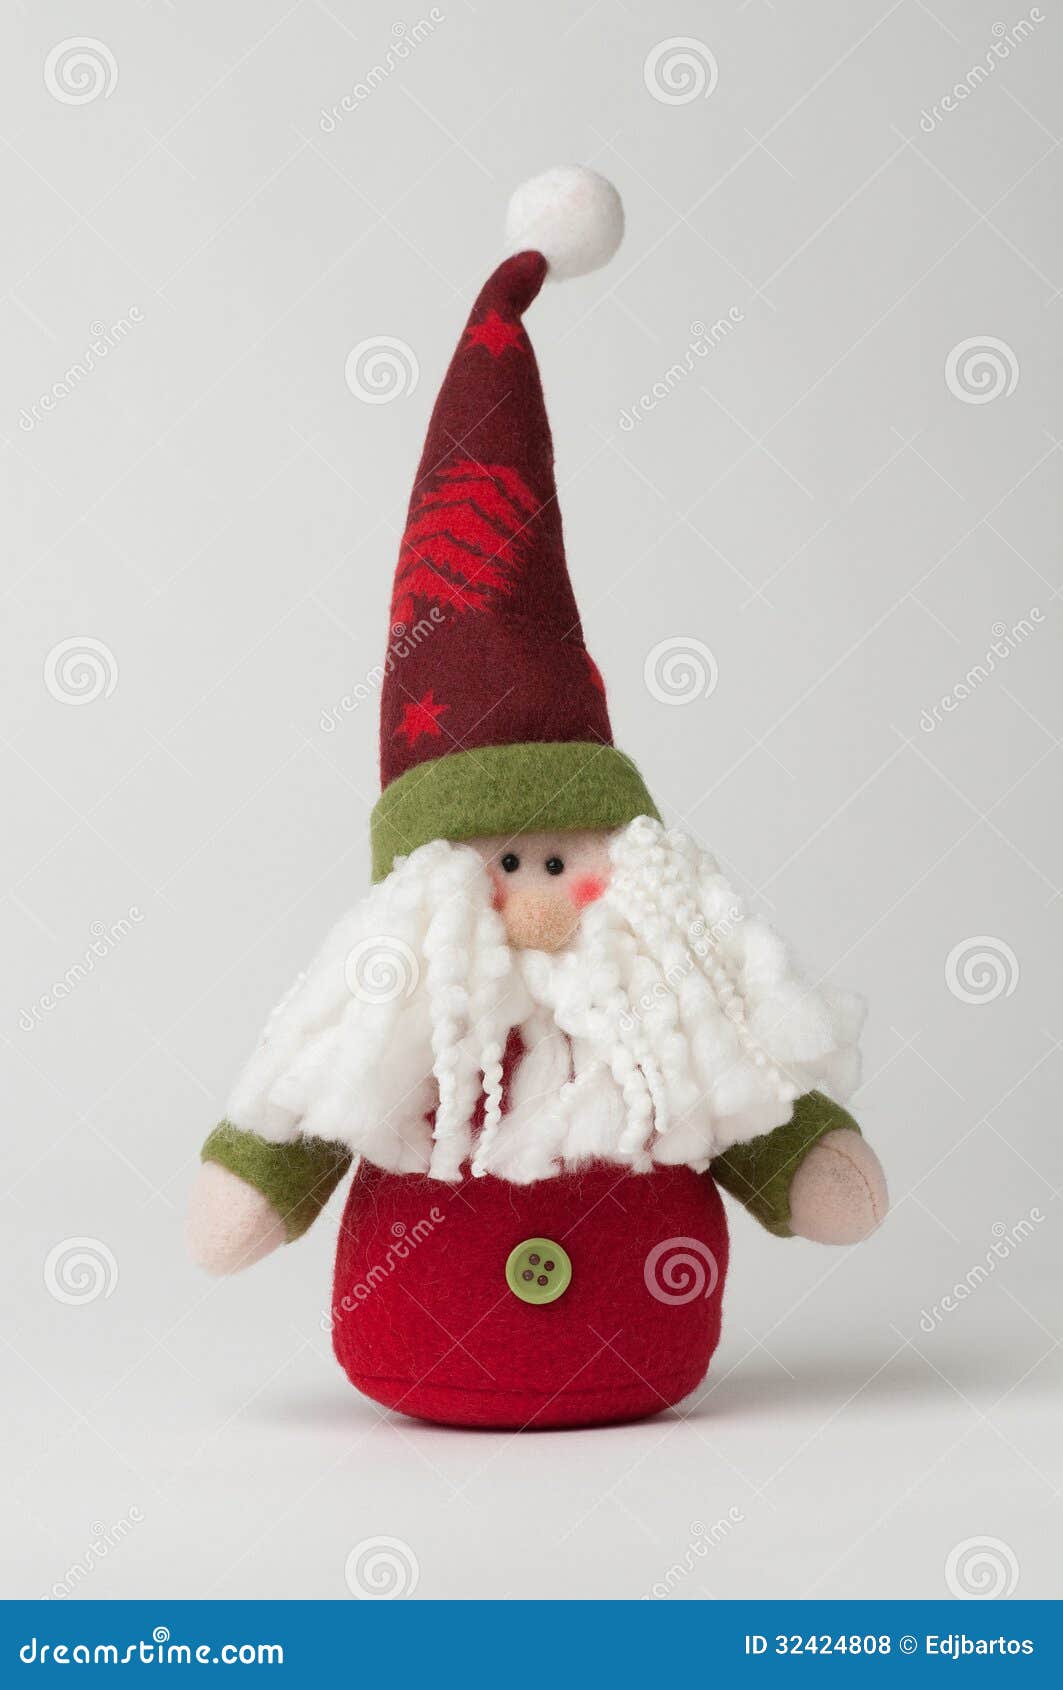 Father Christmas stock photo. Image of claus, happy, holidays - 32424808